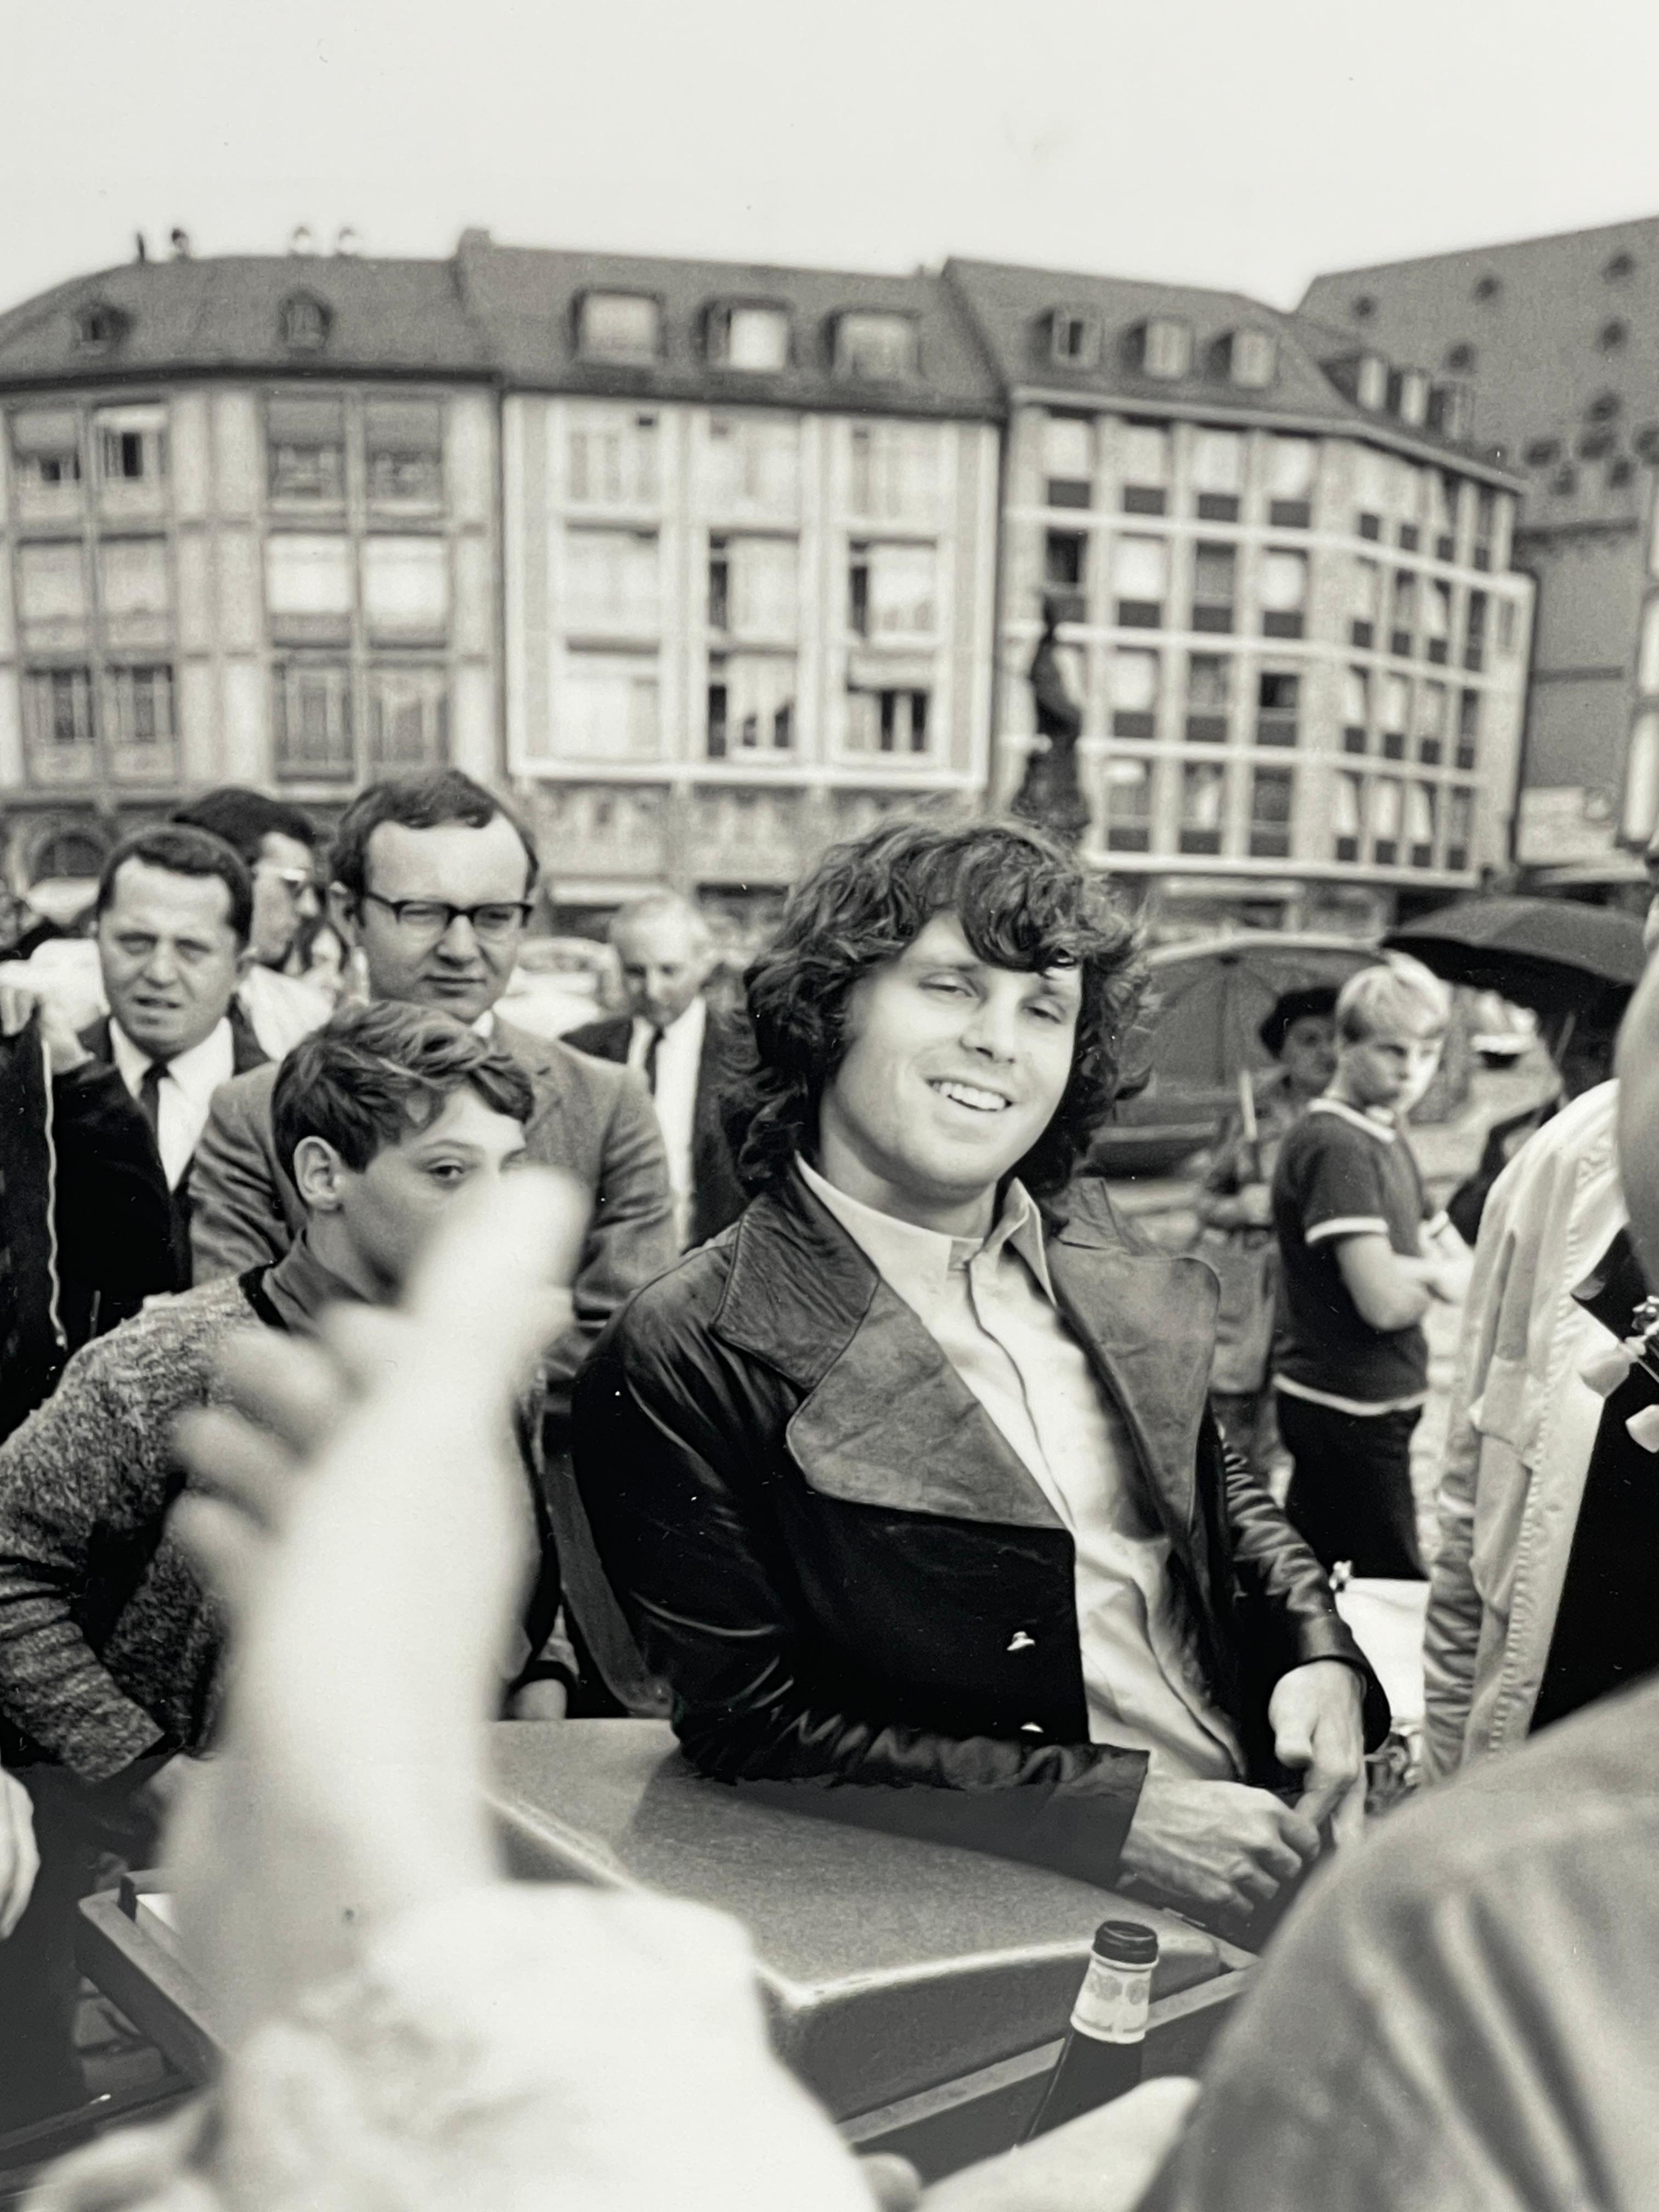 ORIGINAL PHOTOGRAPHY Jim Morrison - The Doors in Europe, Fall 1968. Photo by Michael Montfort.